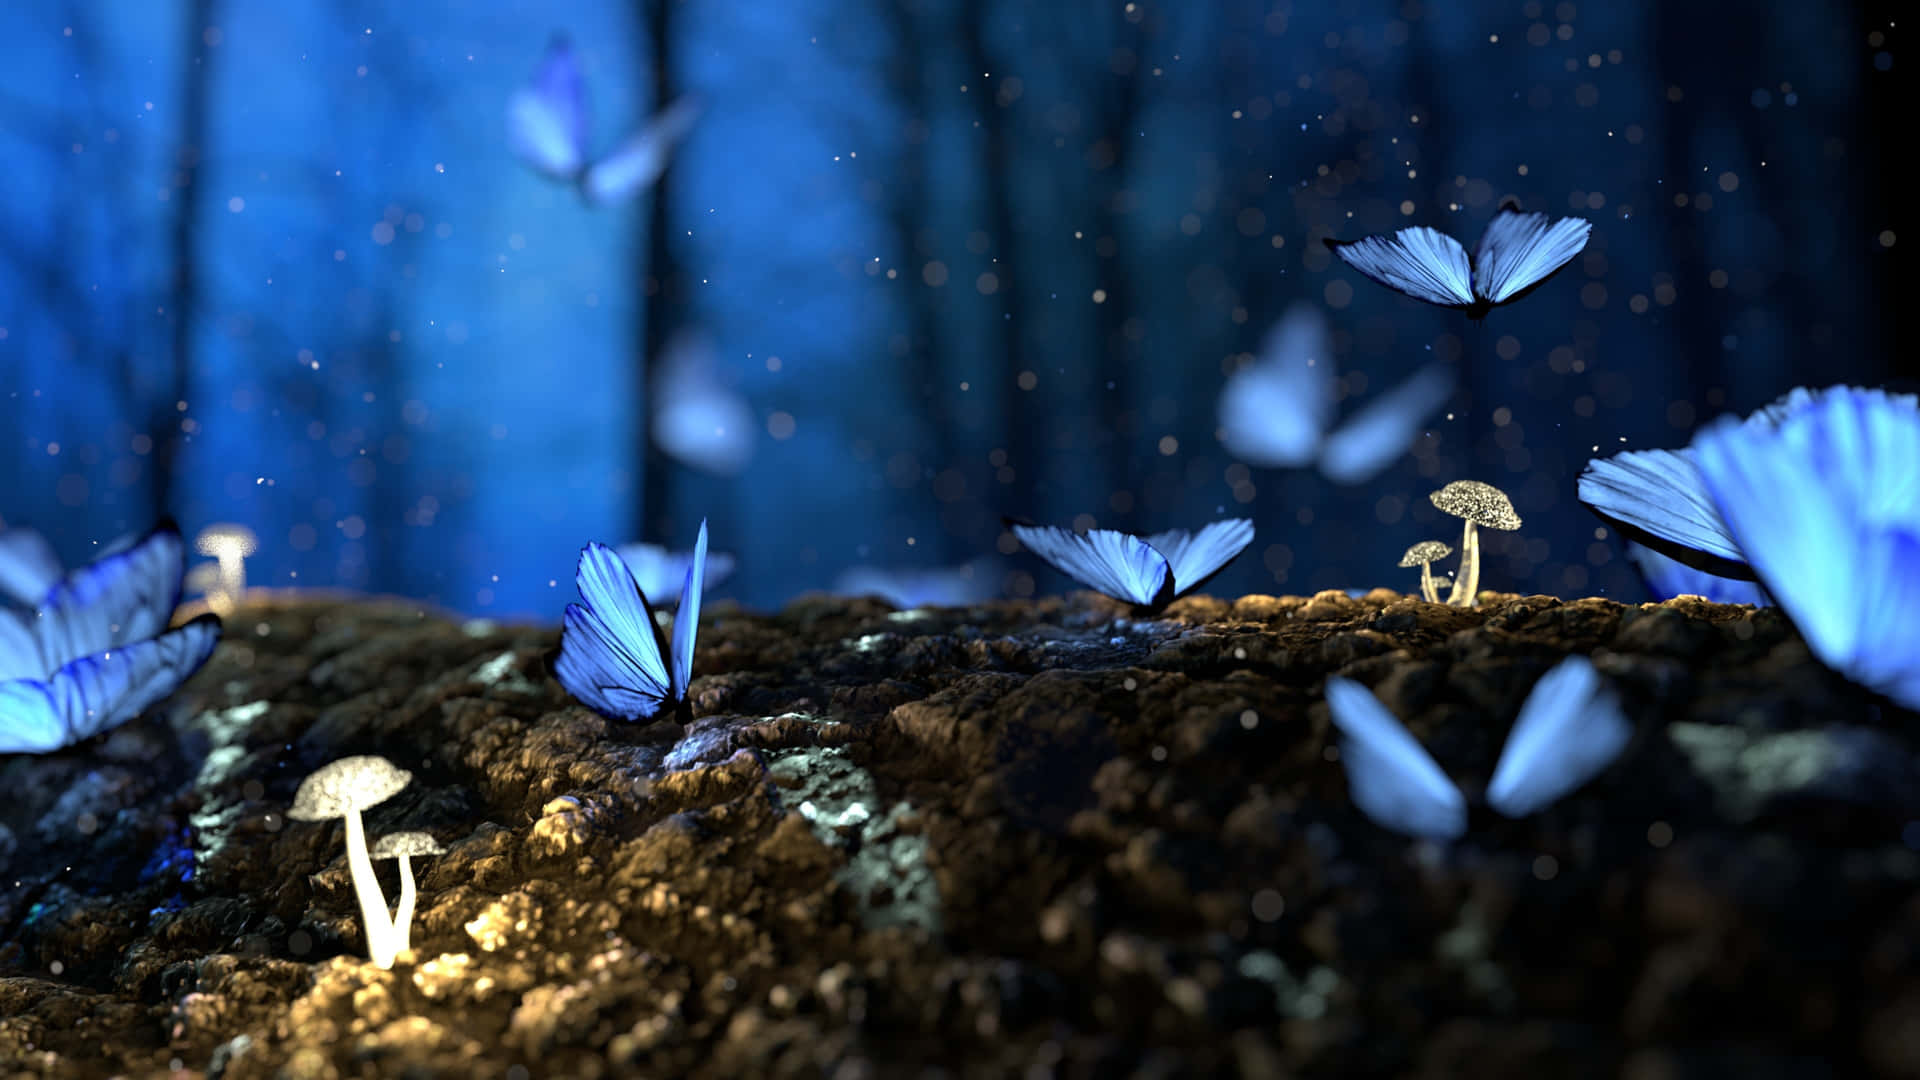 Blue Butterfly Aesthetic Wallpapers  Top Free Blue Butterfly Aesthetic  Backgrounds  WallpaperAccess